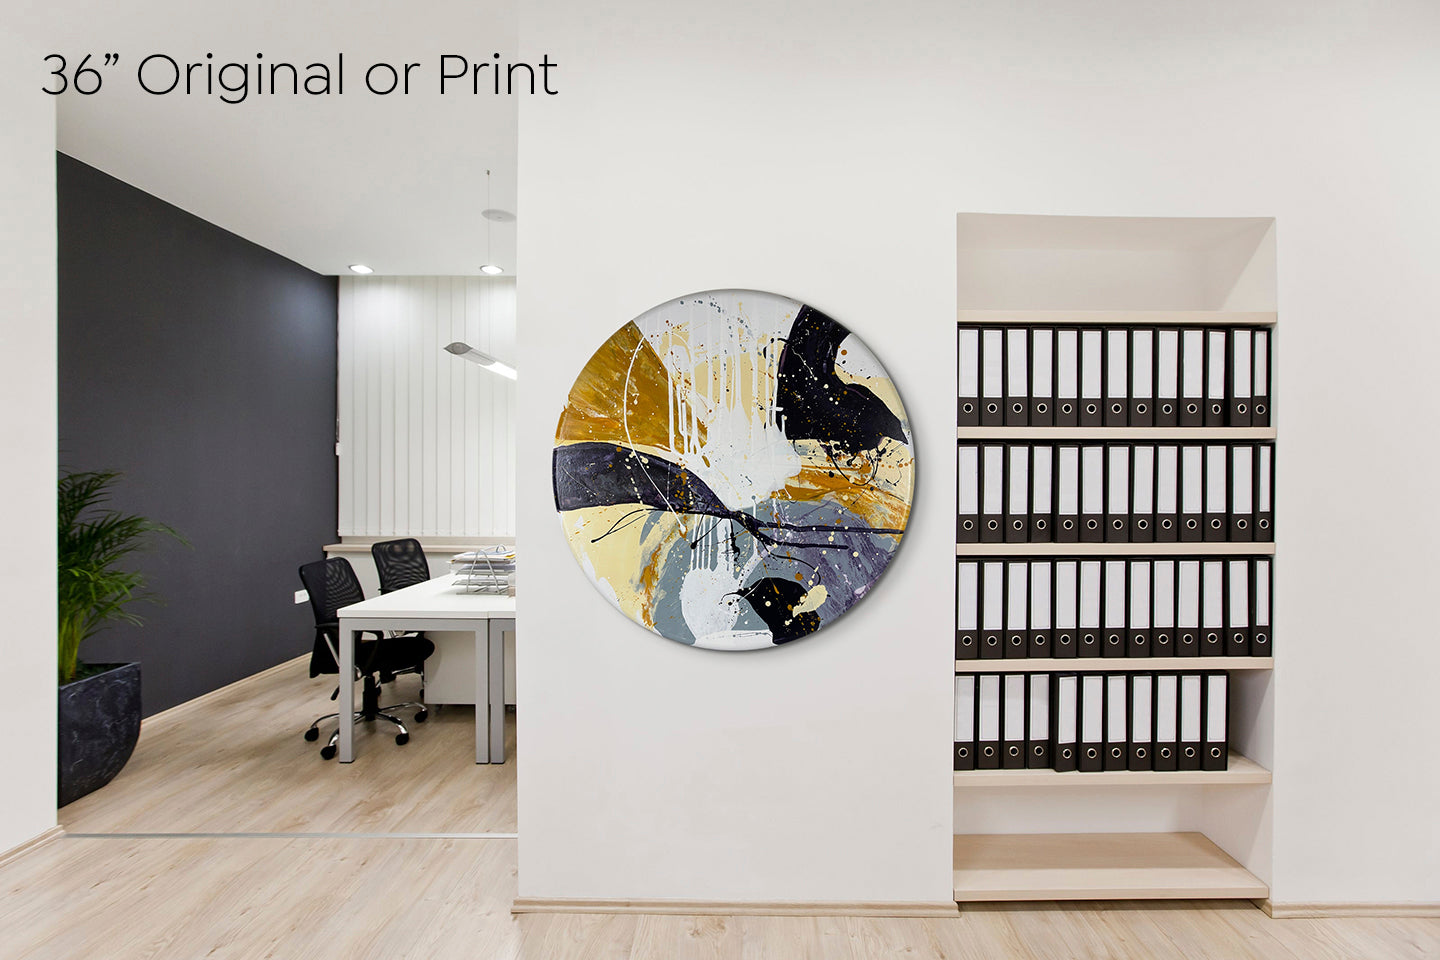 Abstract, acrylic painting on a round canvas with curved-edges shown on a white office reception wall next to a media shelf and dark feature wall.